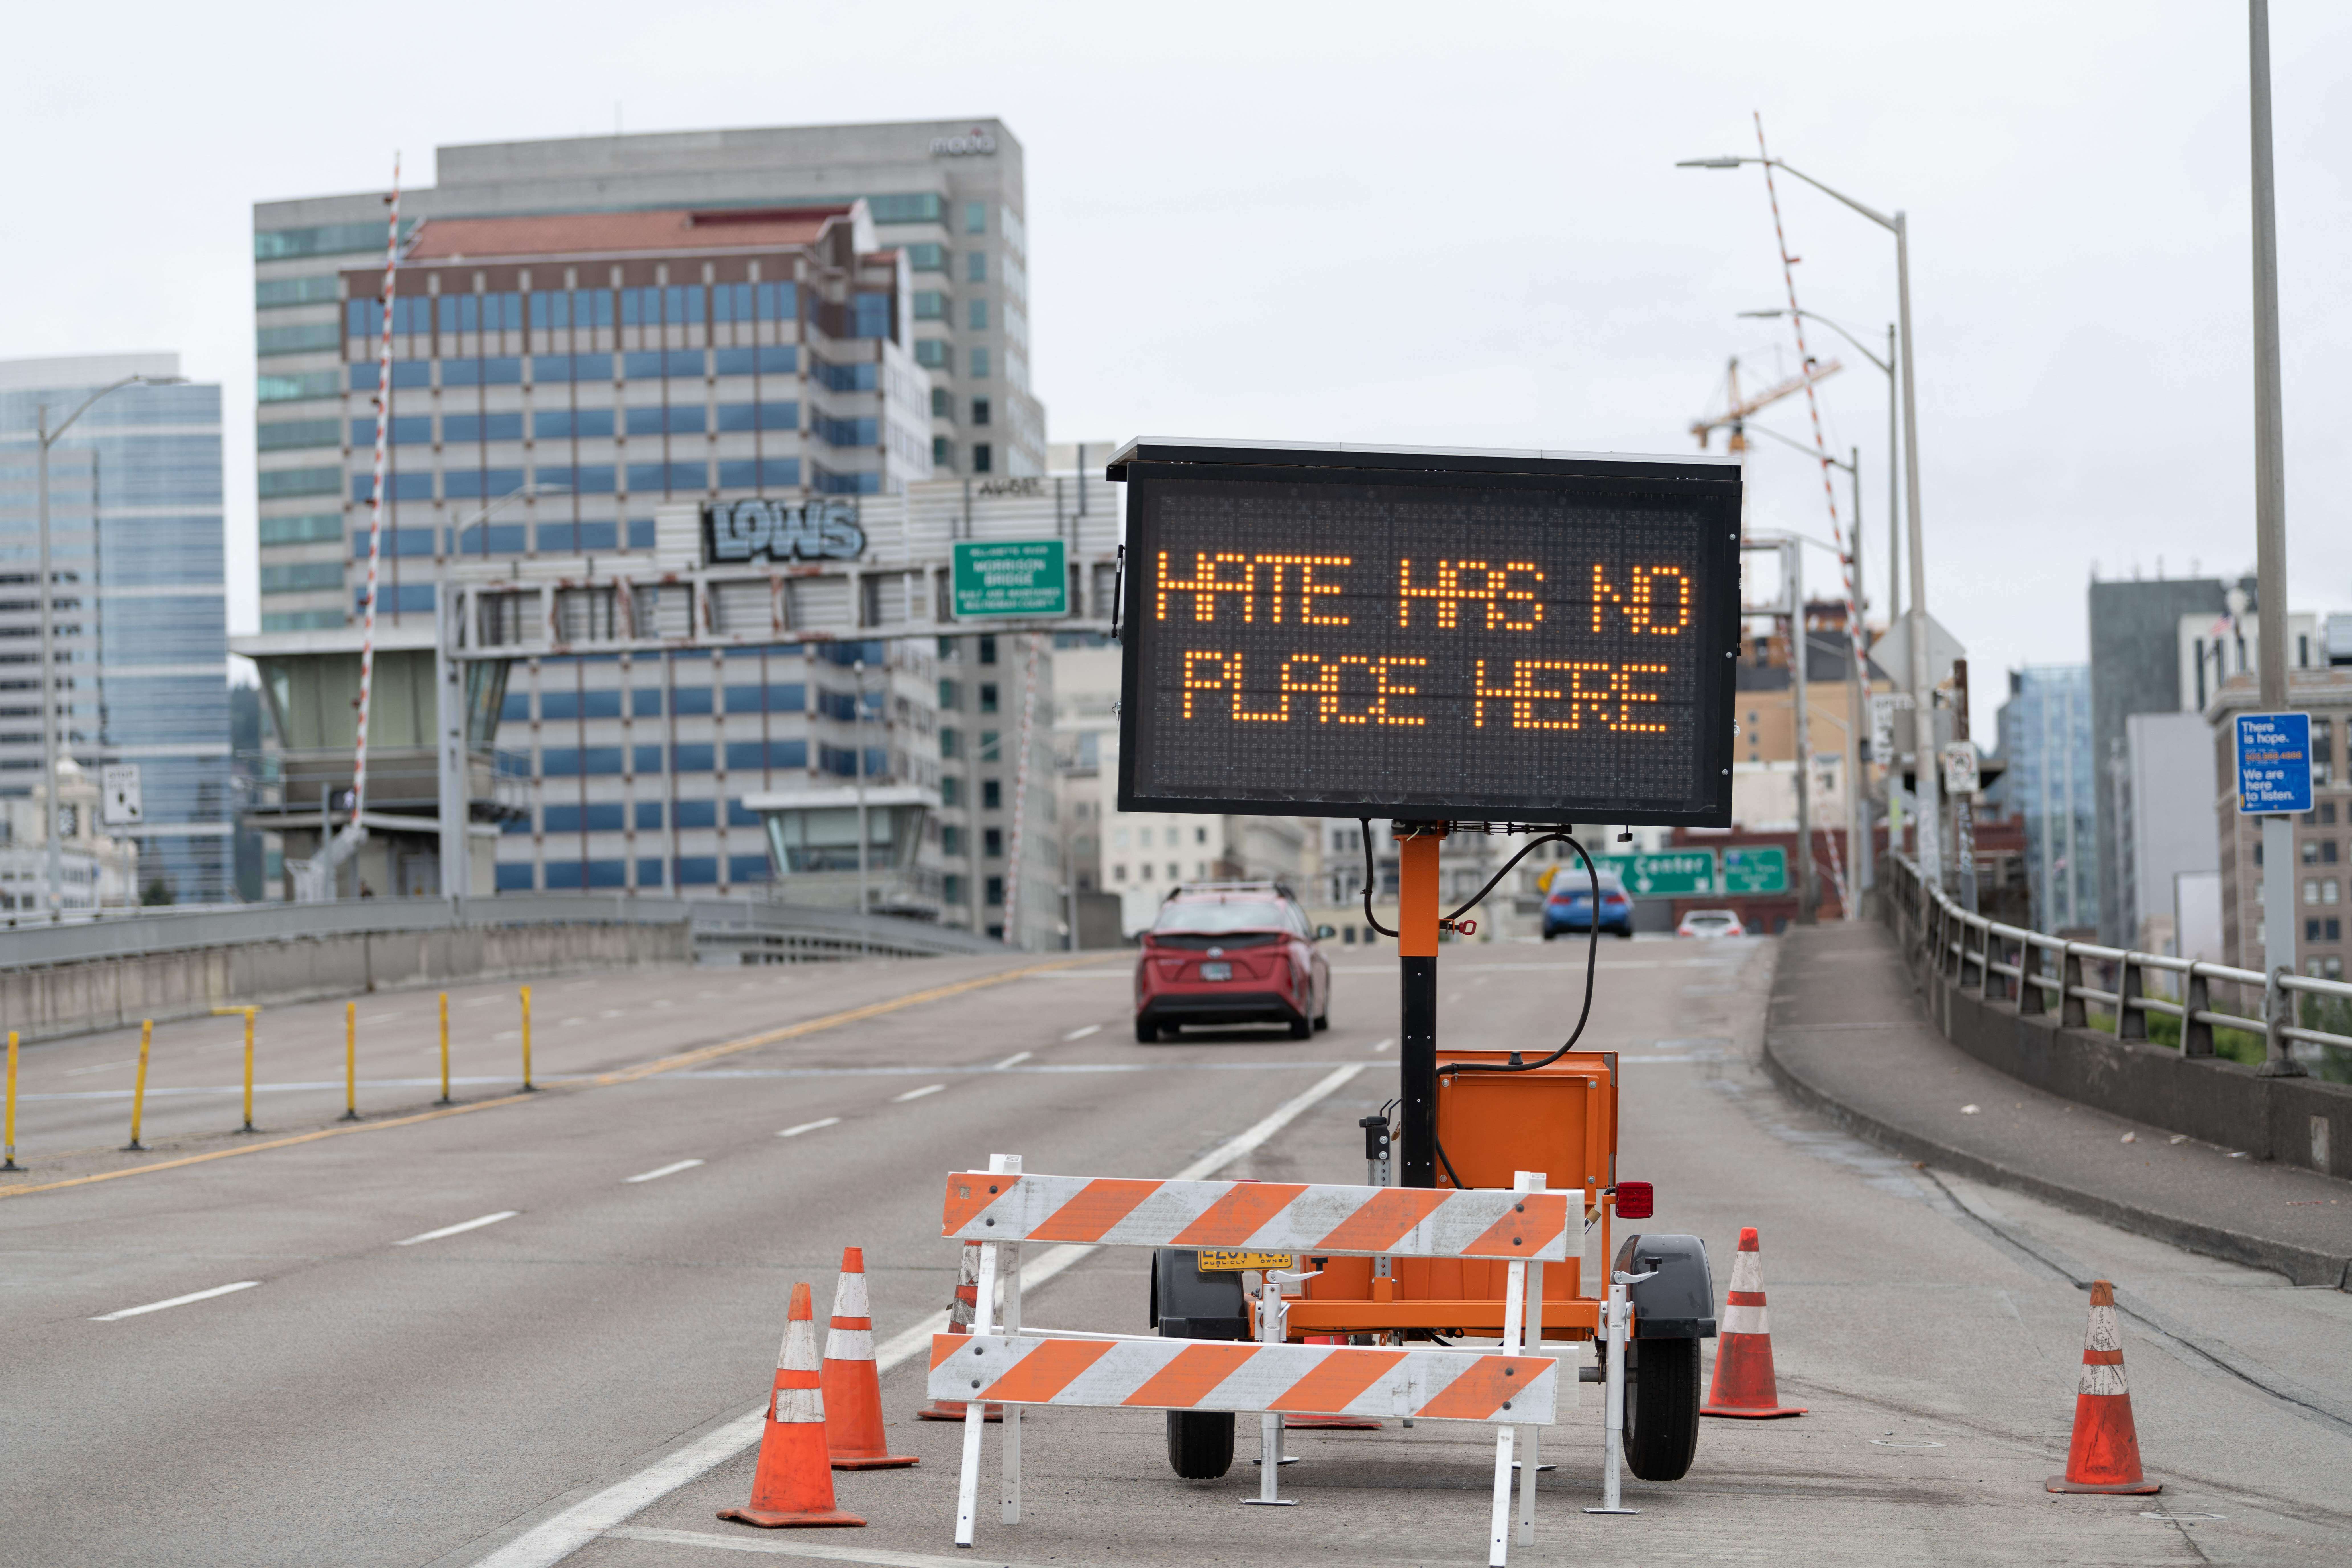 A traffic sign displays a message on a bridge in Portland, Oregon, in 2021 ahead of a far-right demonstration in the city. The Anti-Defamation League found that incidents of white supremacist propaganda more than doubled in 2022 compared to the previous year.